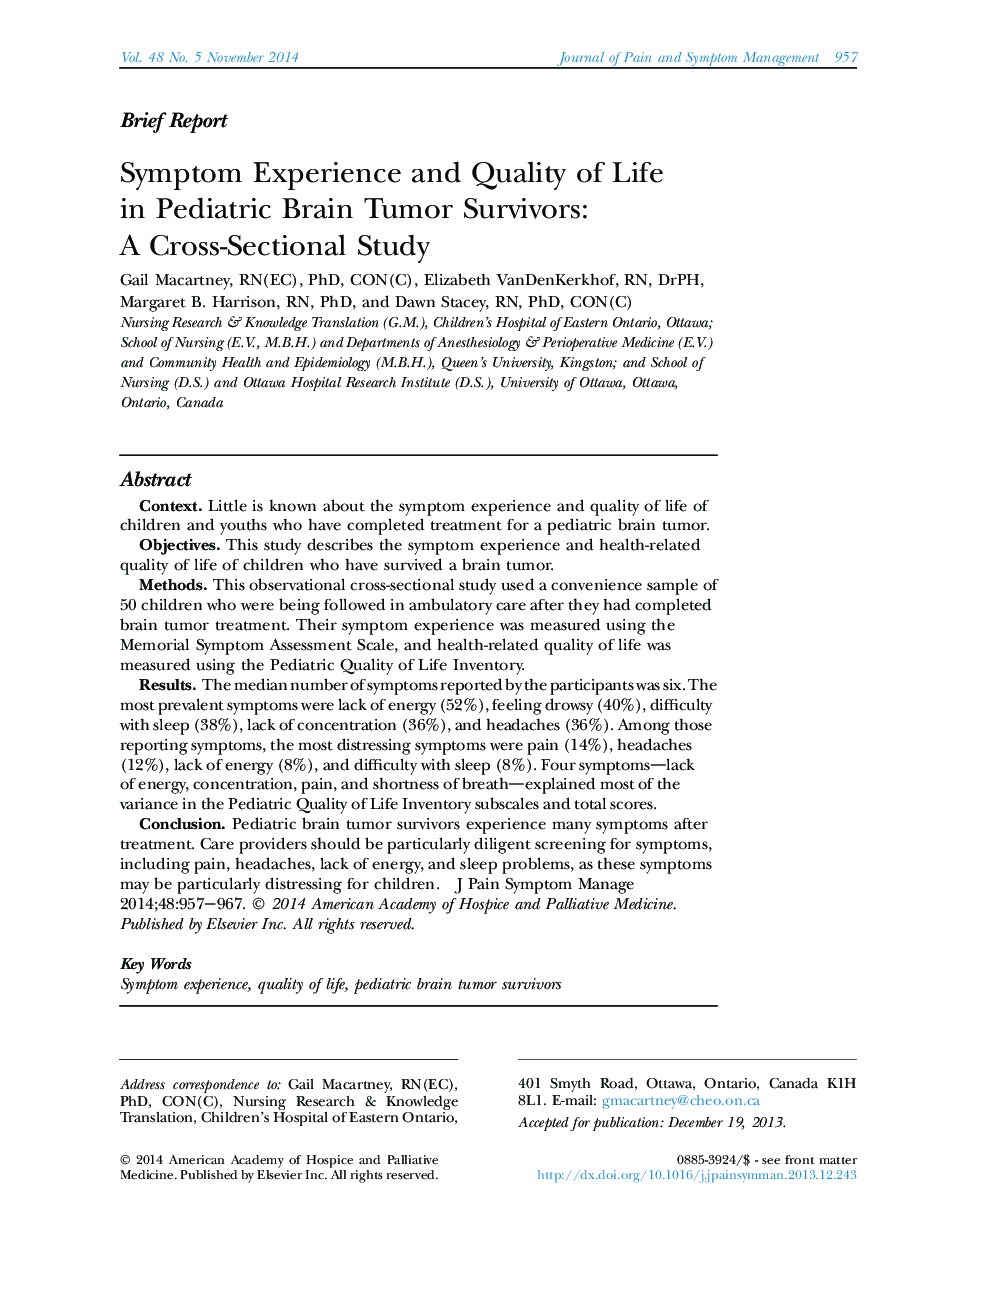 Symptom Experience and Quality of Life in Pediatric Brain Tumor Survivors: A Cross-Sectional Study